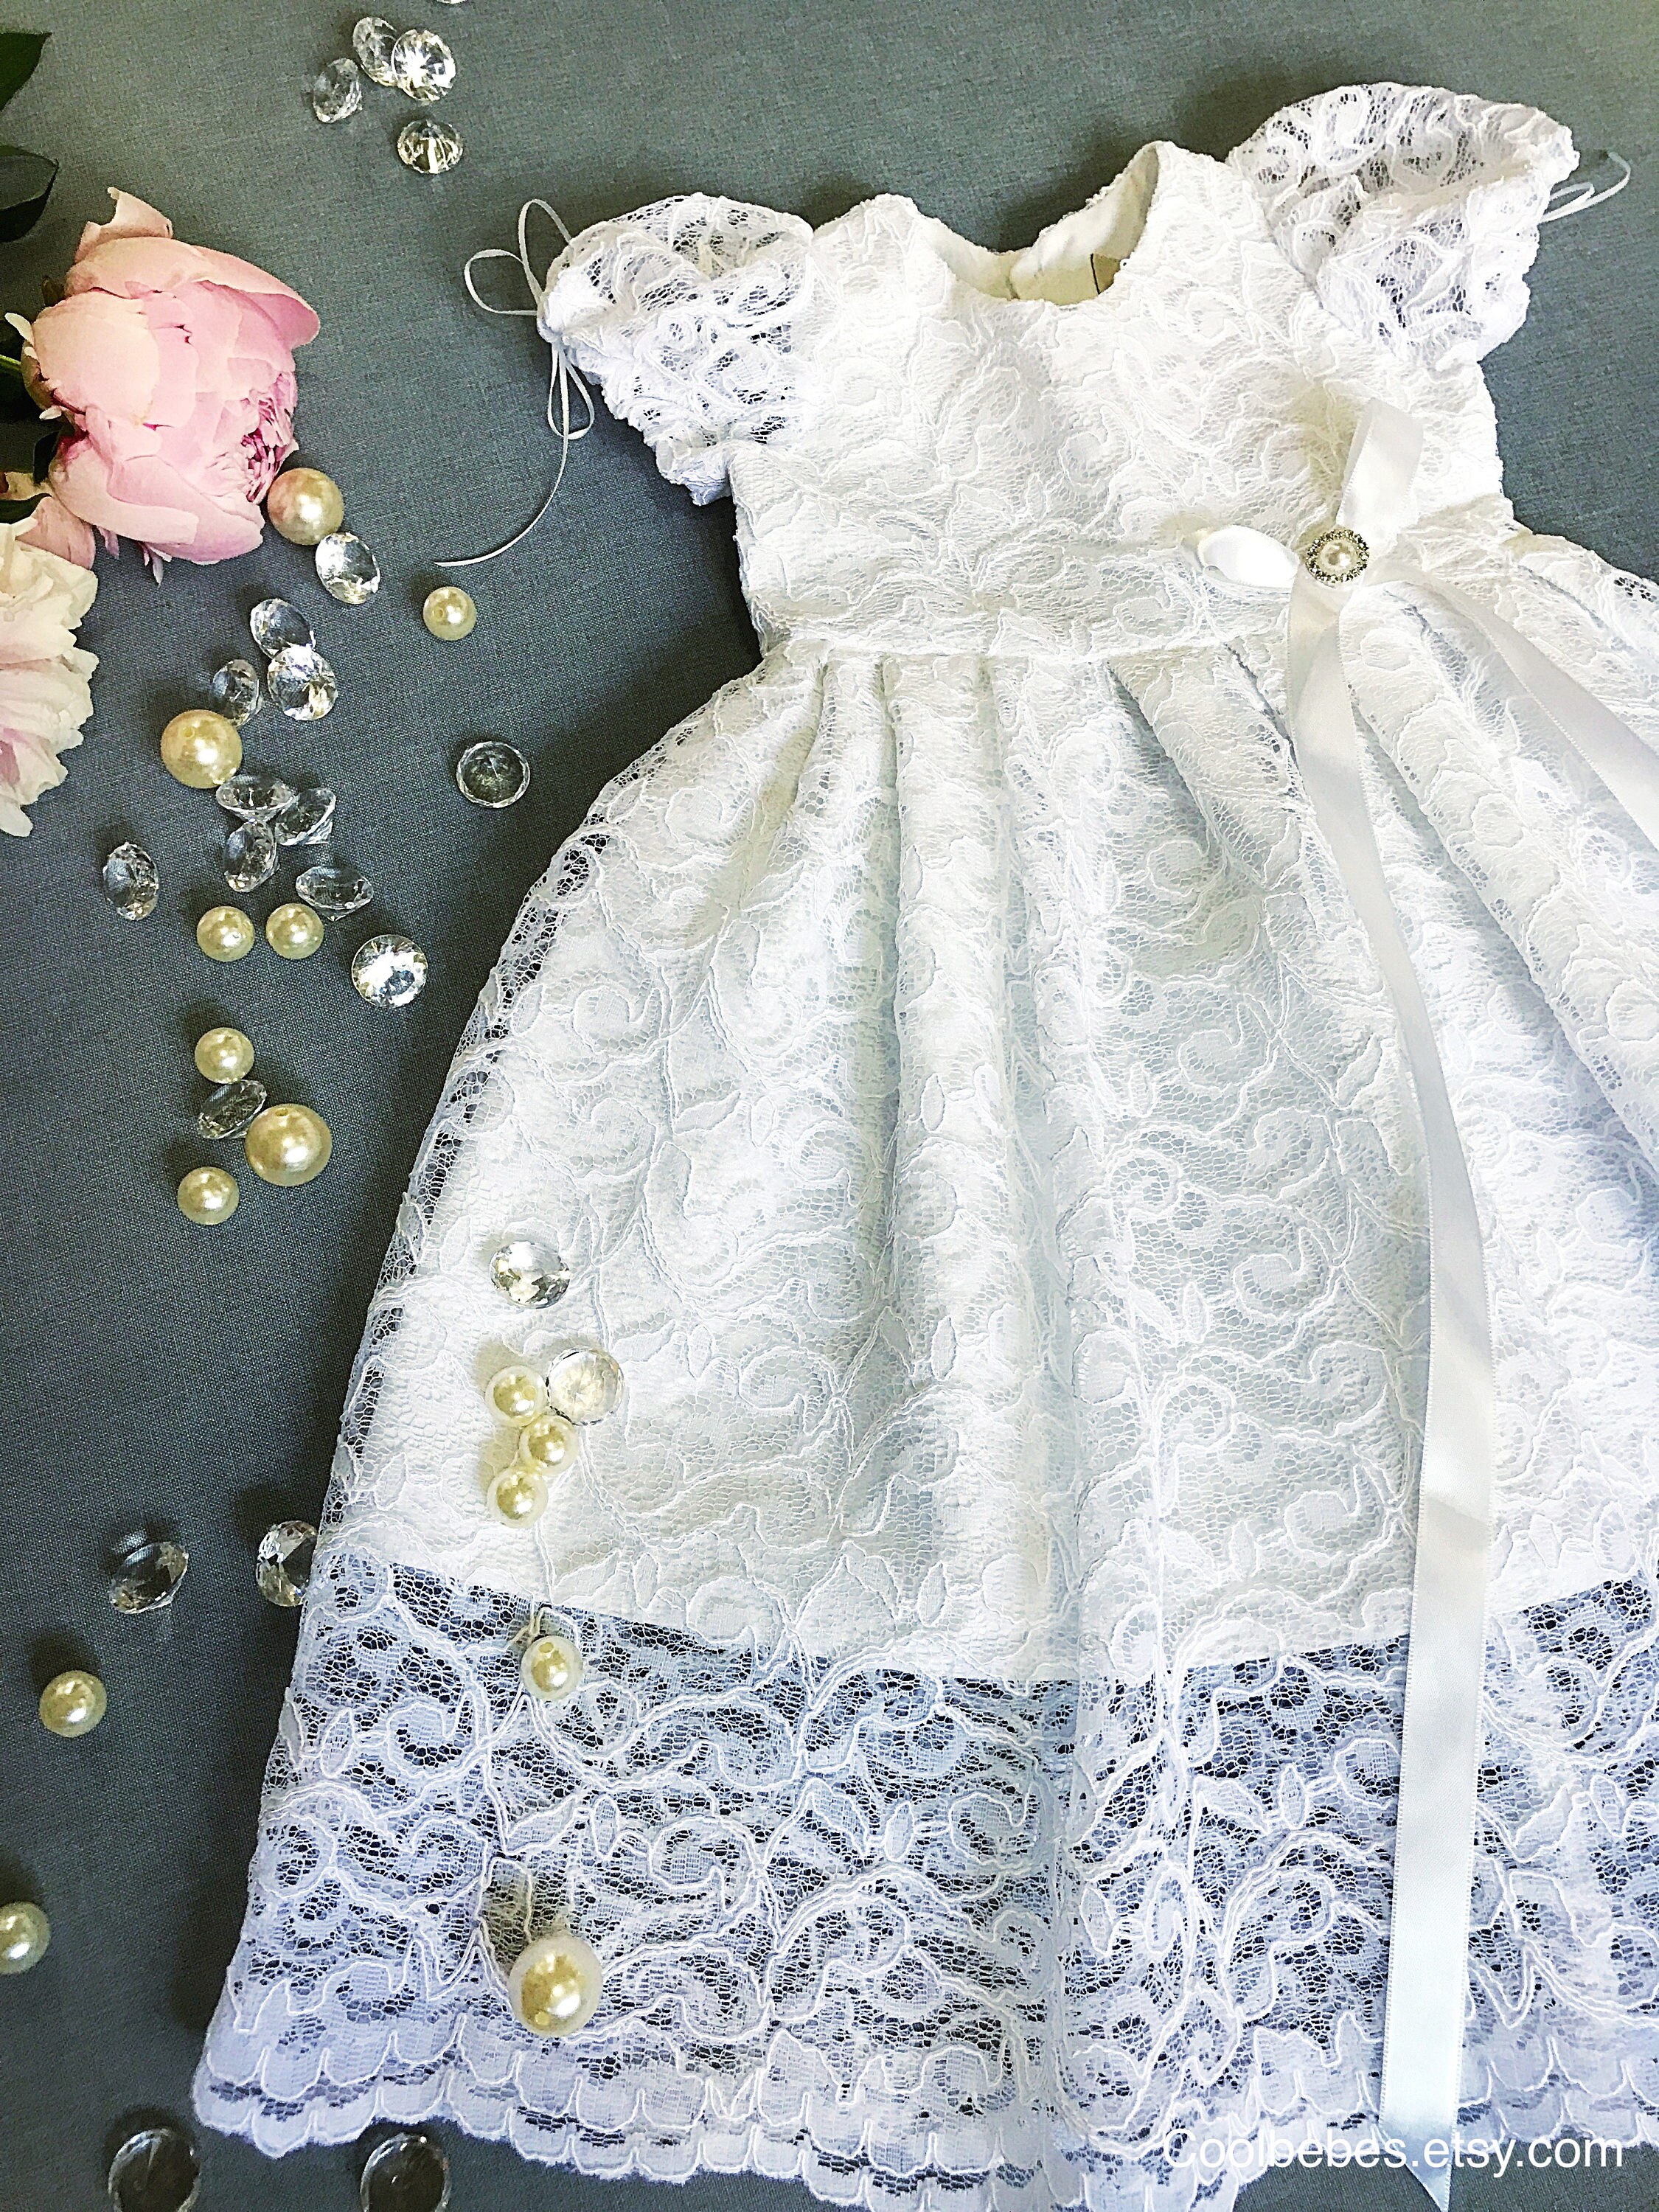 Buy Girls White Lace Christening Gown Cape Bonnet 0 3 6 12 18 24 Months  Online in India - Etsy